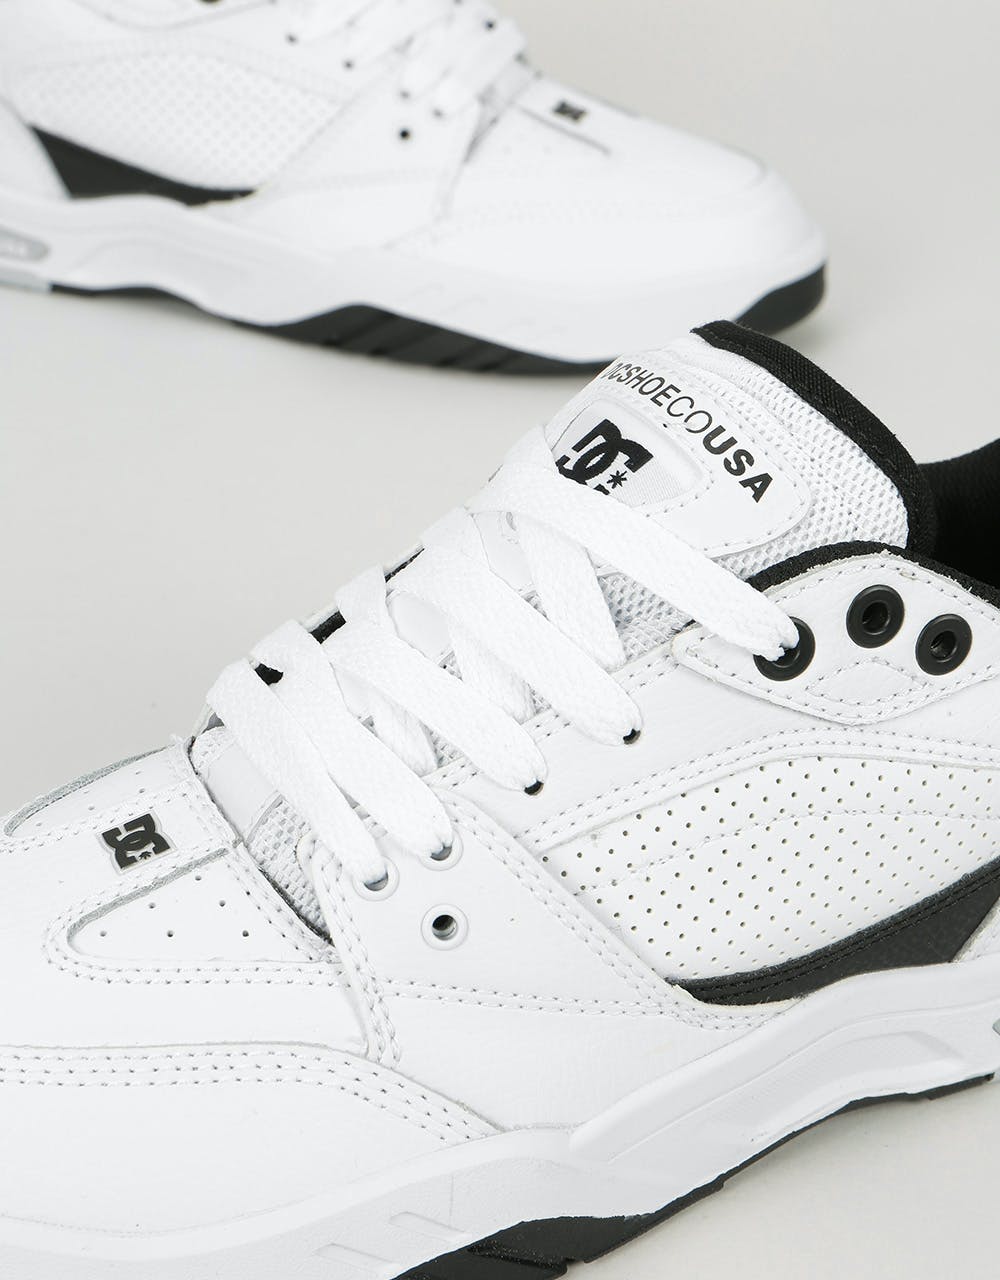 DC Maswell Skate Shoes - White/Black